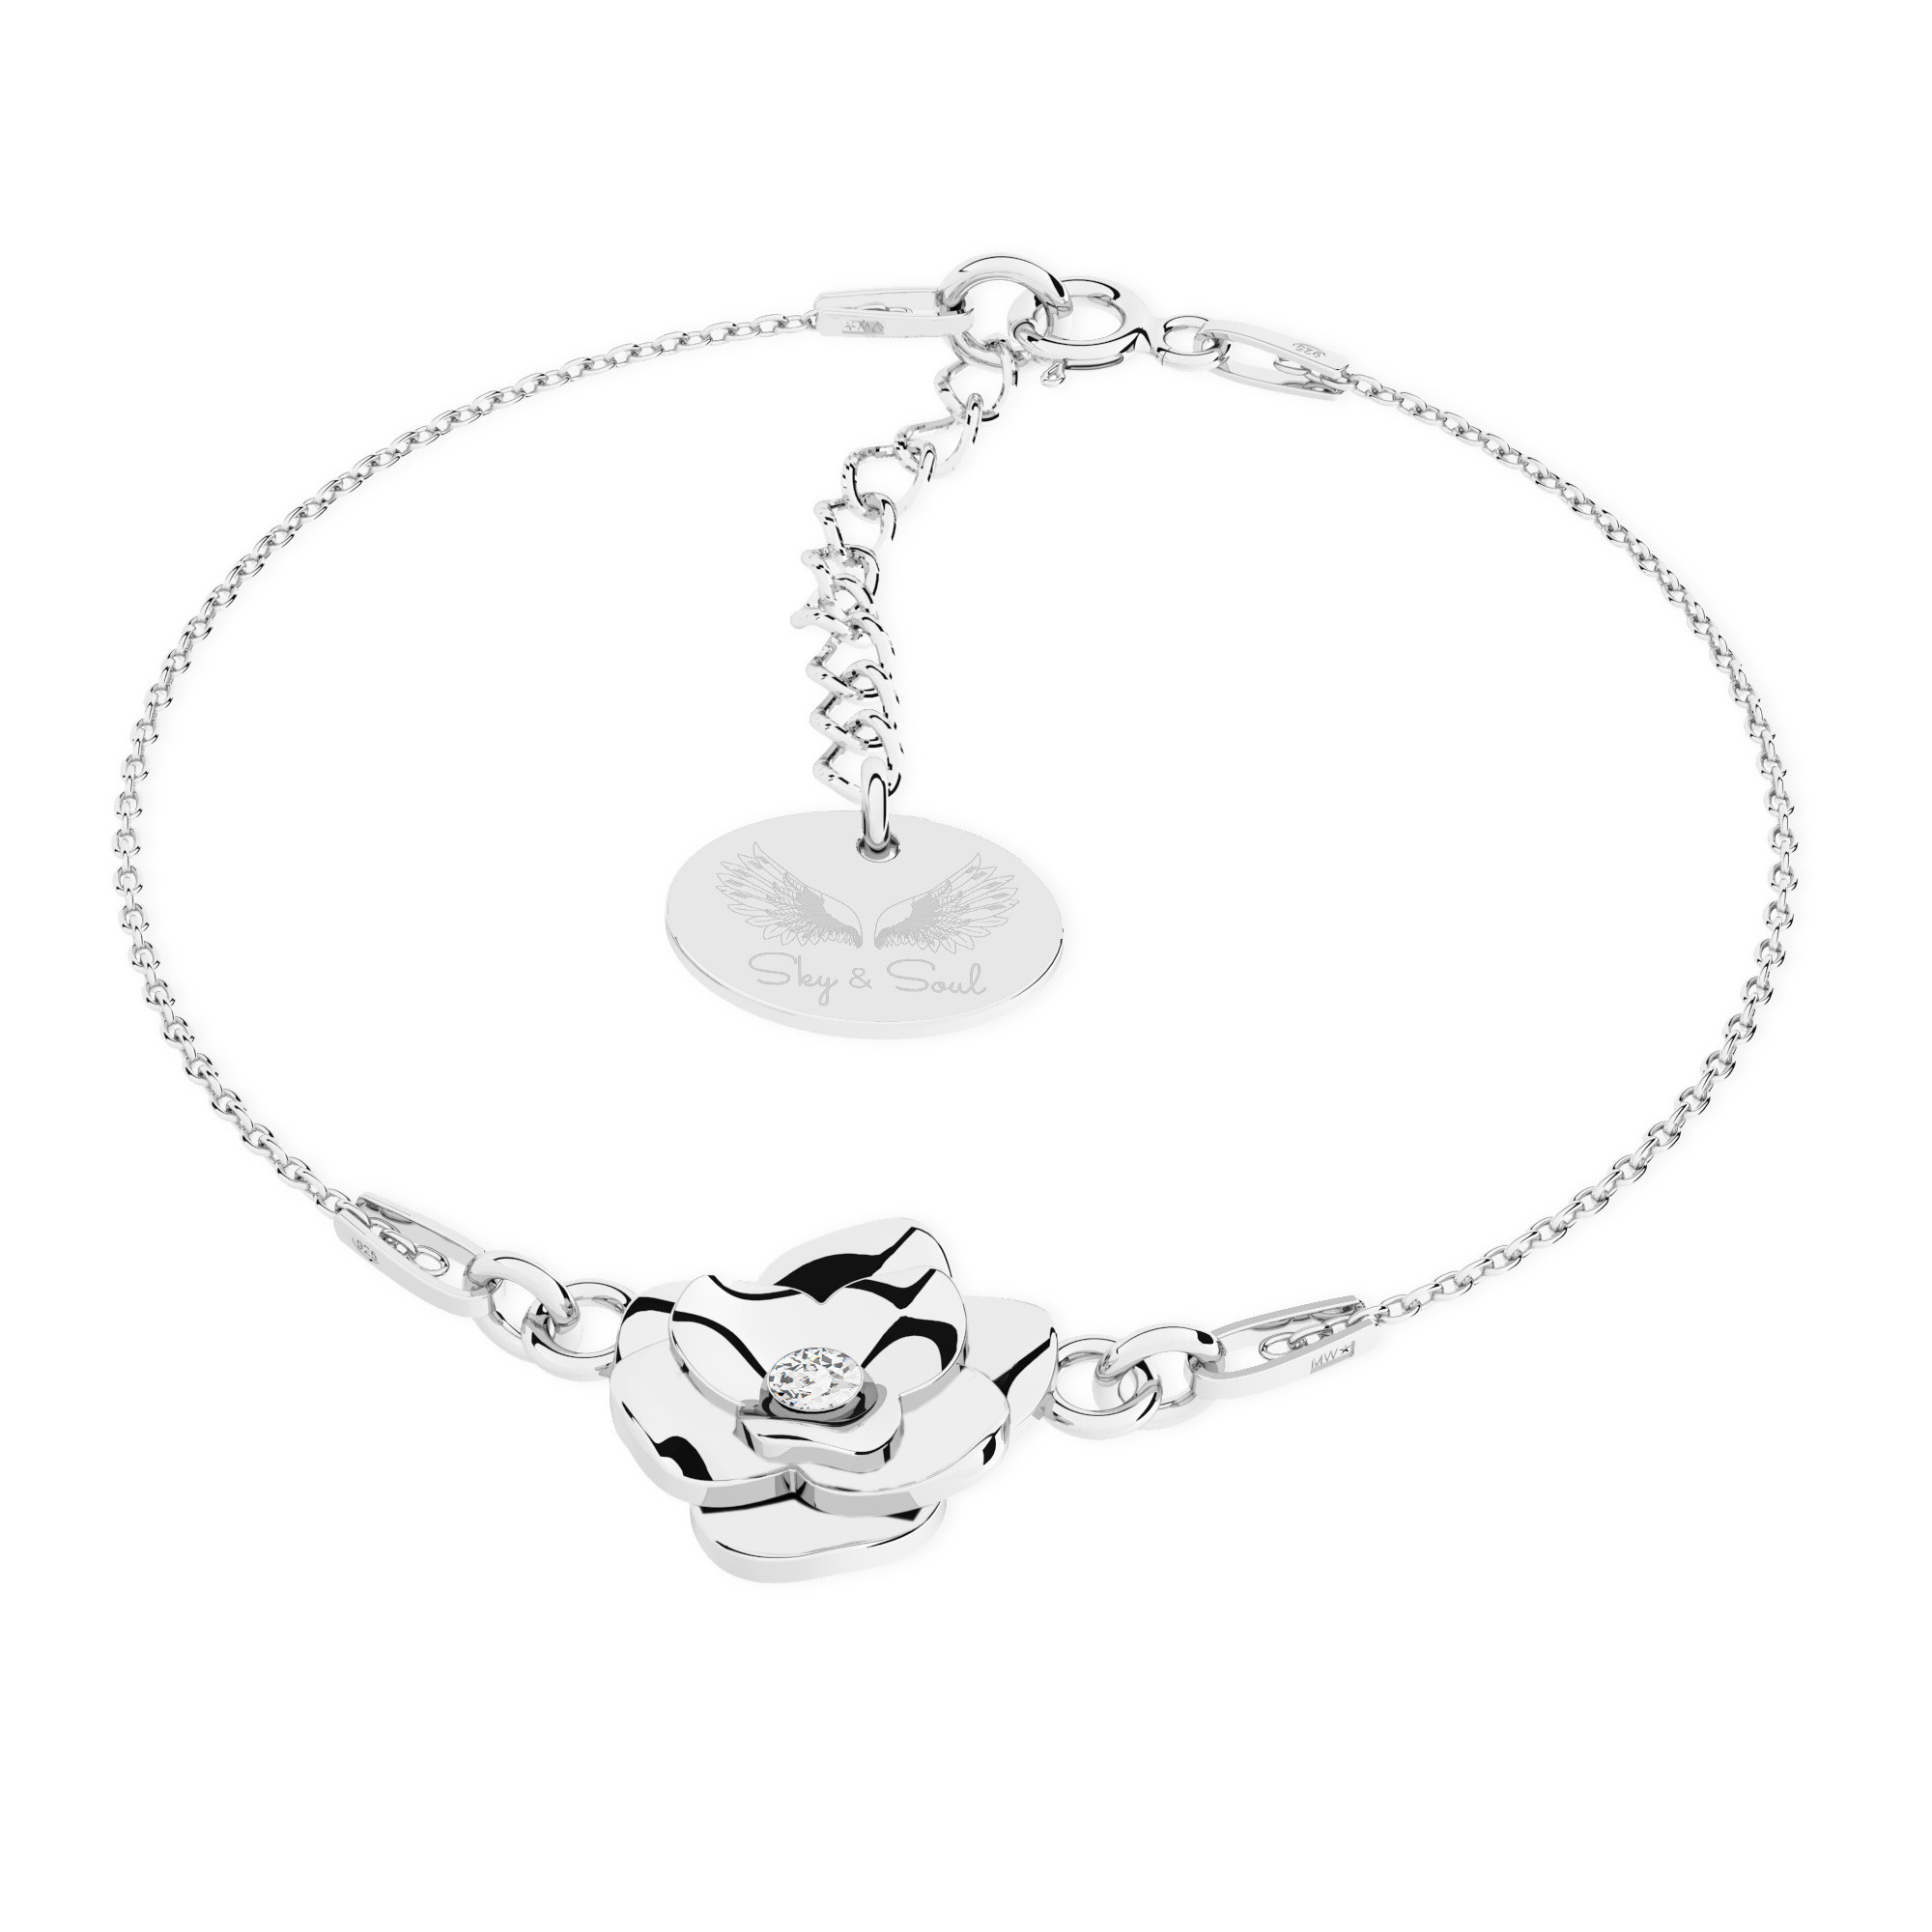 Rose necklace with cystal, Sky&Co, sterling silver 925